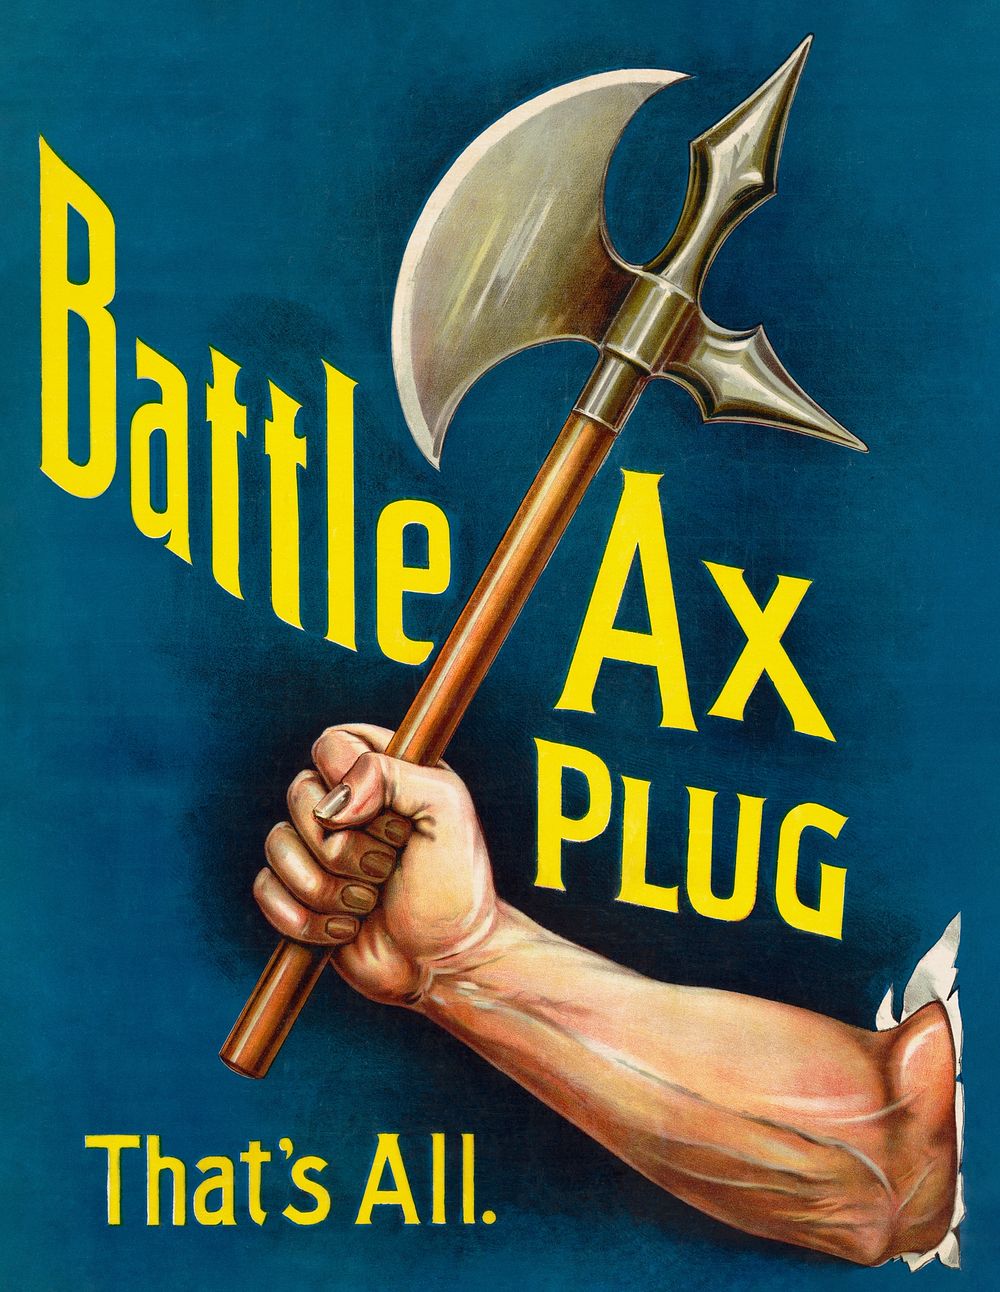 Battle ax plug, that's all (1896). Original public domain image from the Library of Congress. Digitally enhanced by rawpixel.